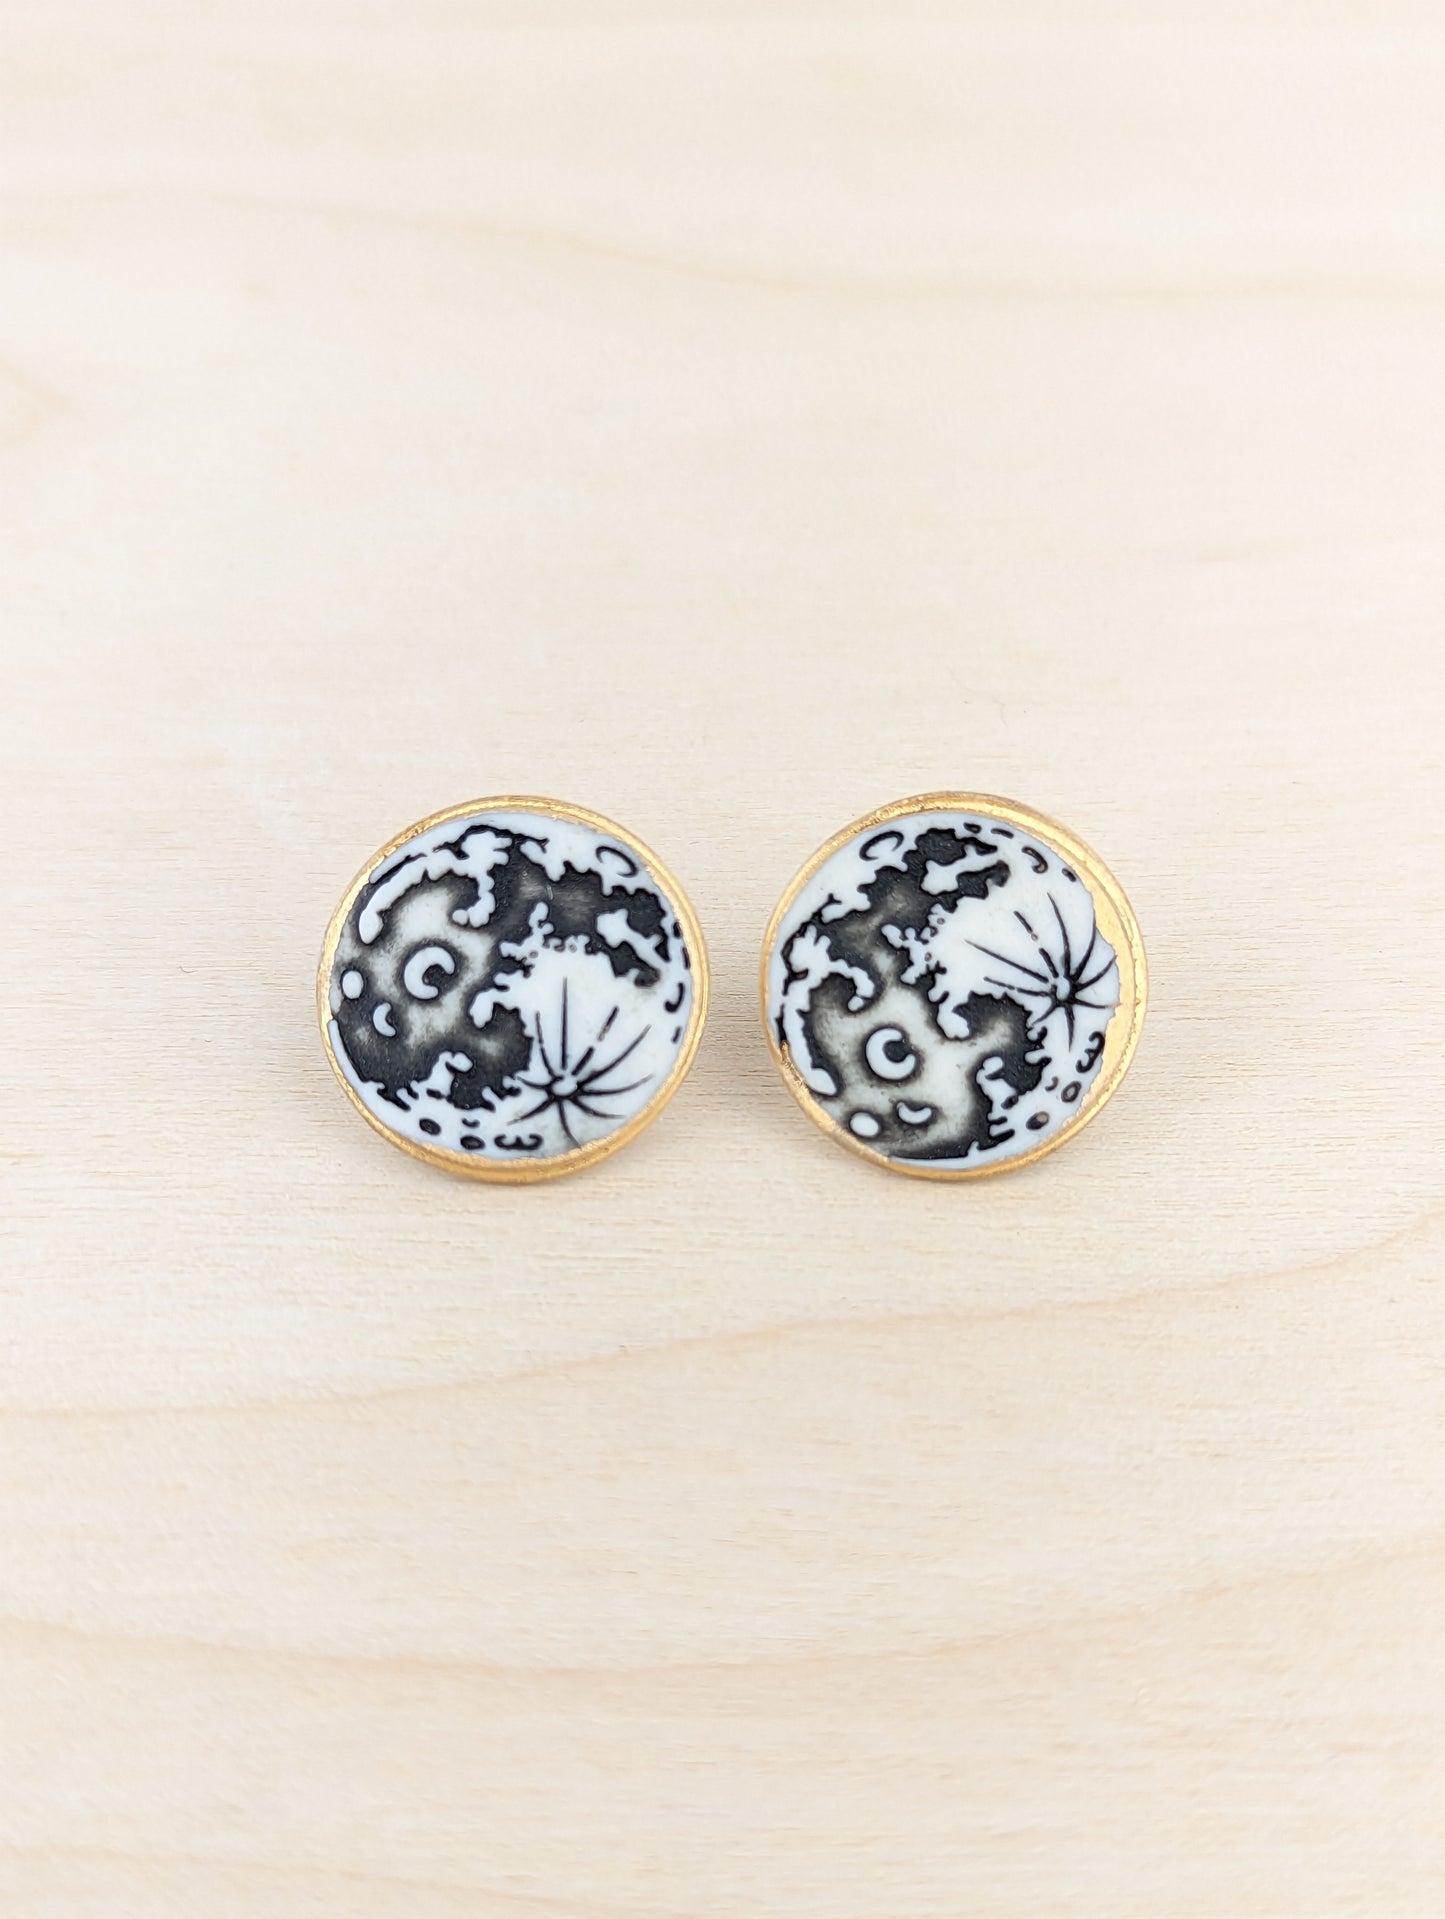 Matte Black and White Full Moon Studs with Gold Rim